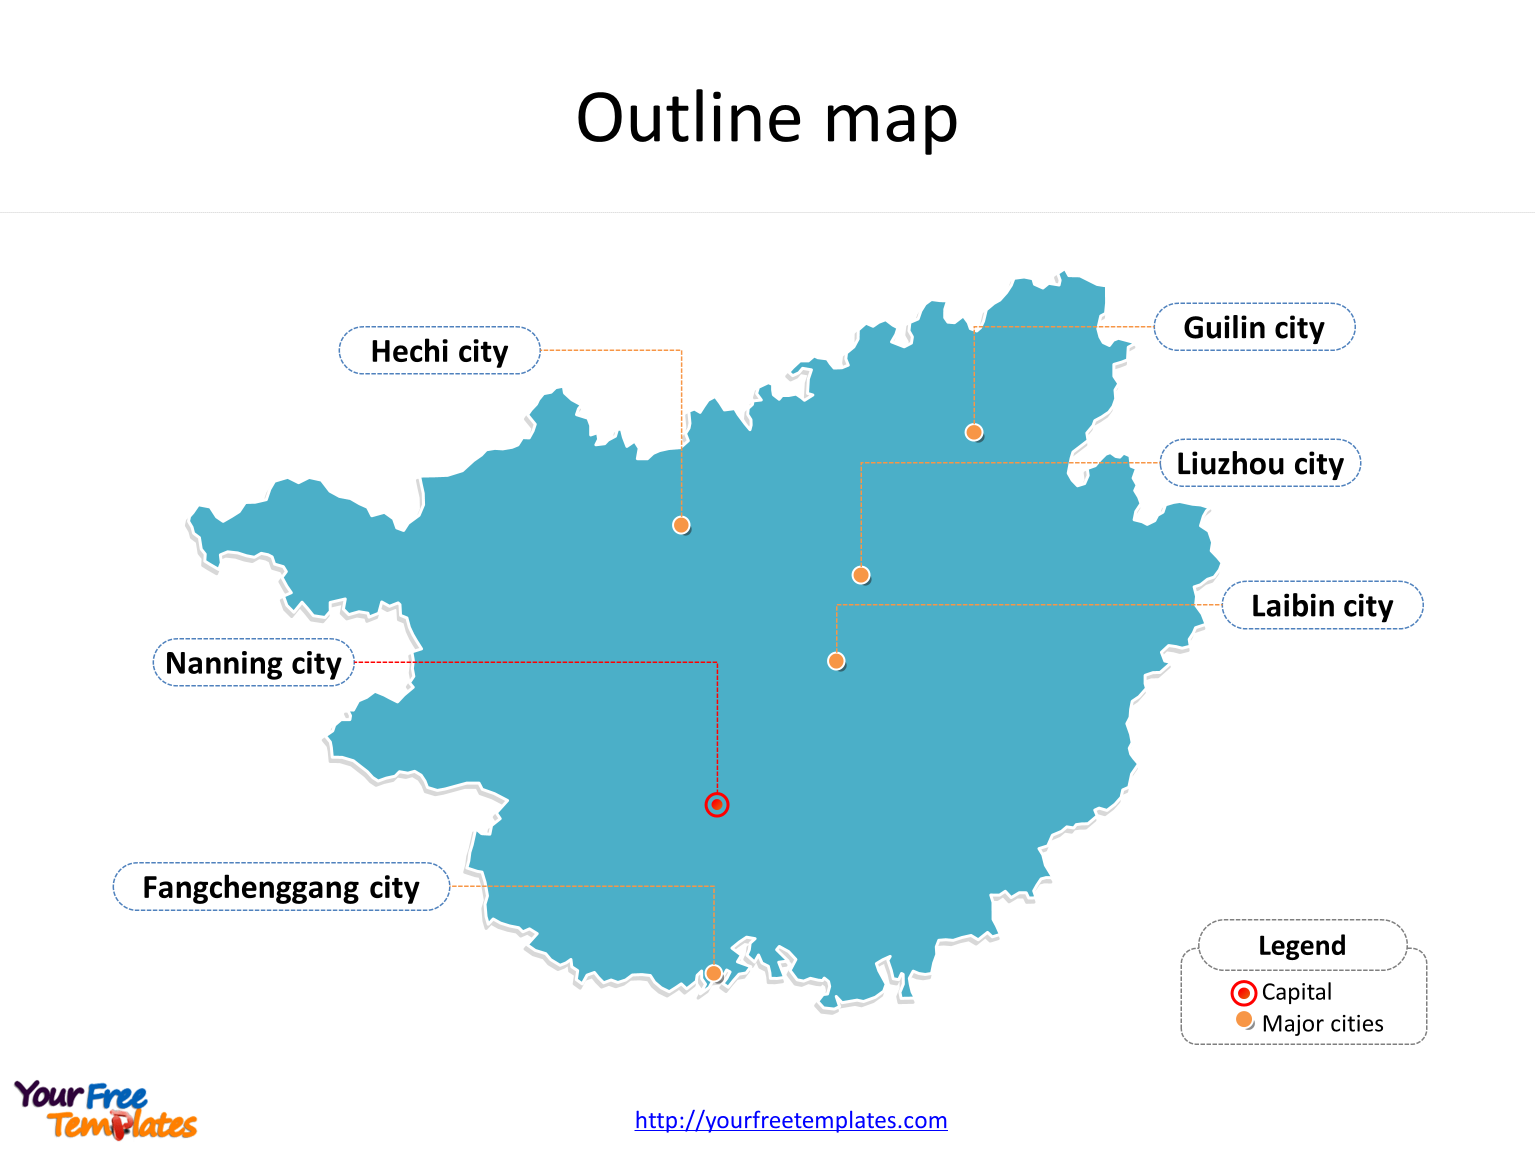 Guangxi Zhuang Autonomous Region of Guangxi map with outline and cities labeled on the Guangxi maps PowerPoint templates